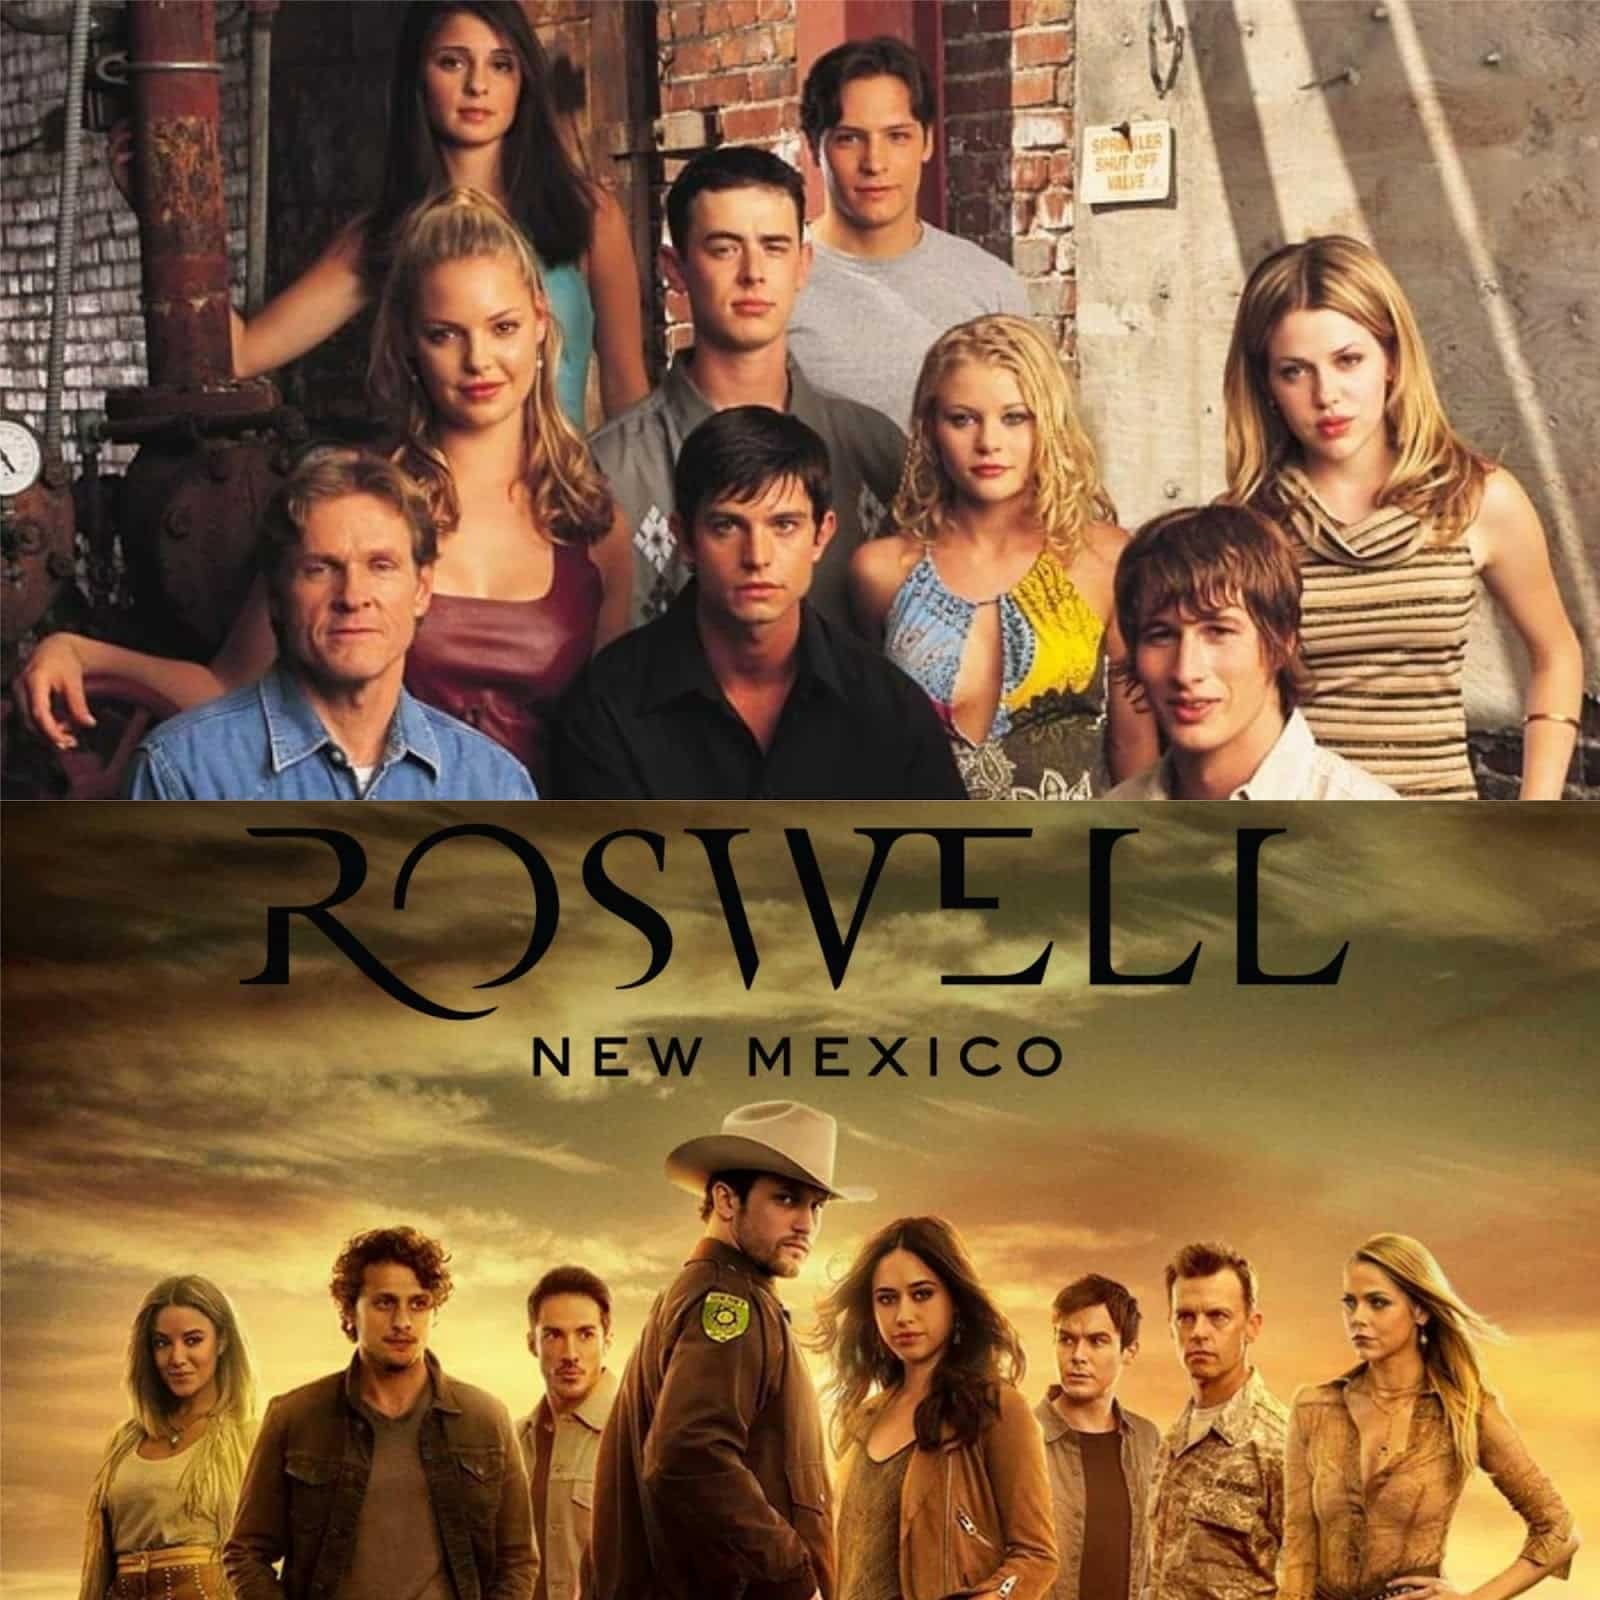 Is Roswell and Roswell, New Mexico the same?